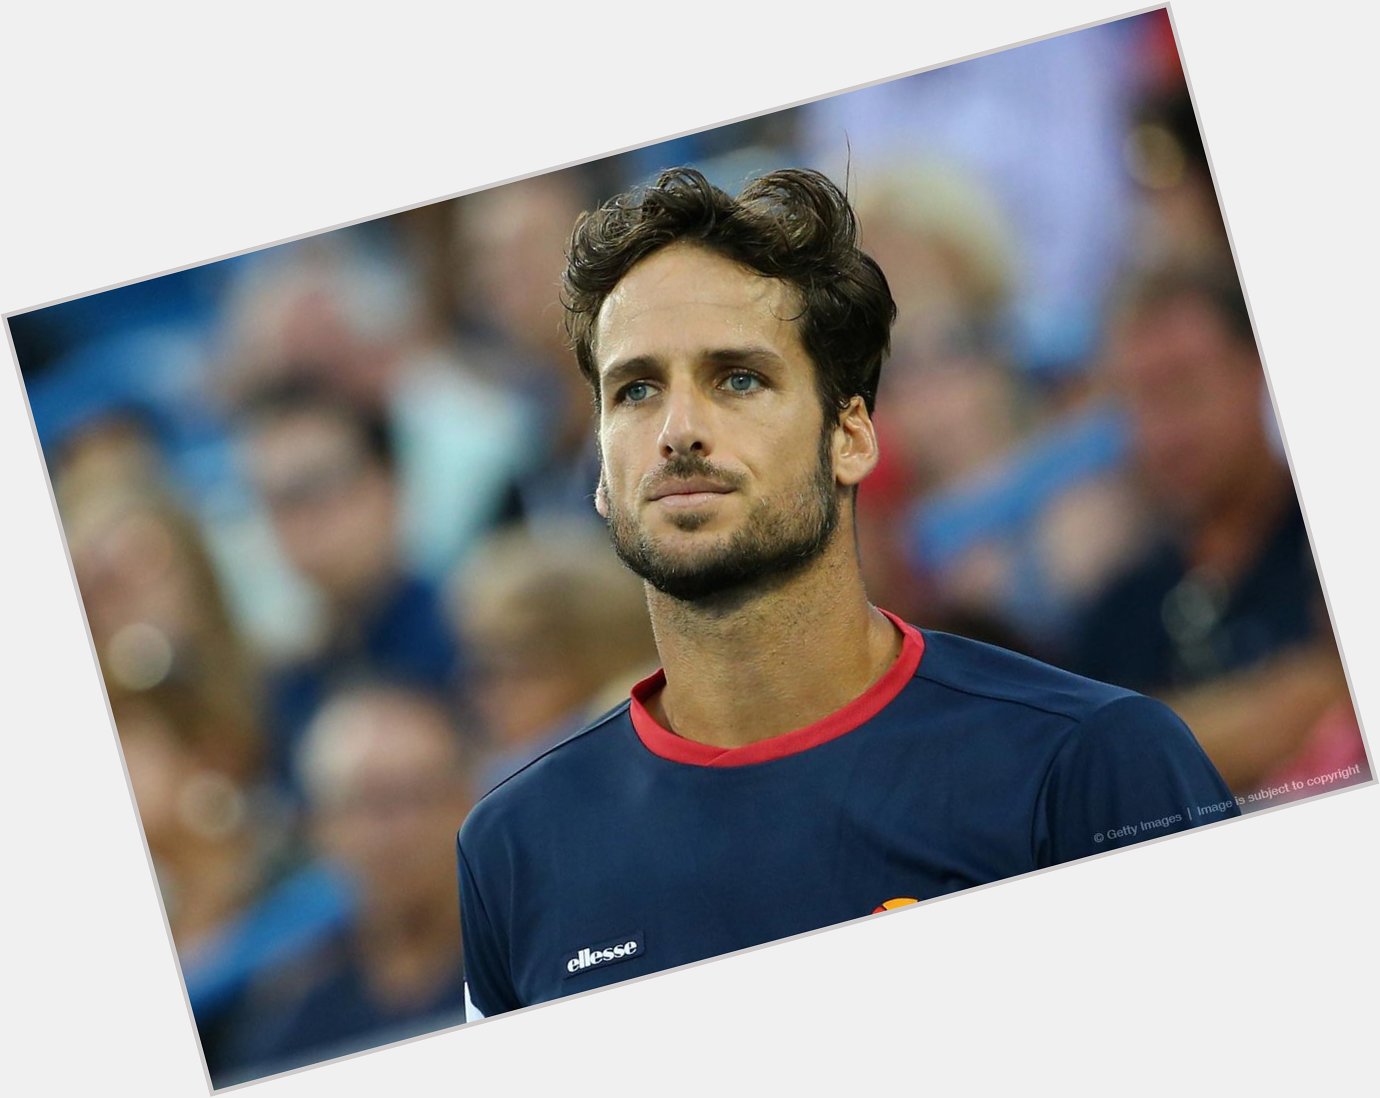  Happy Birthday Feli!! All the best! Health and happiness to you and your family! 